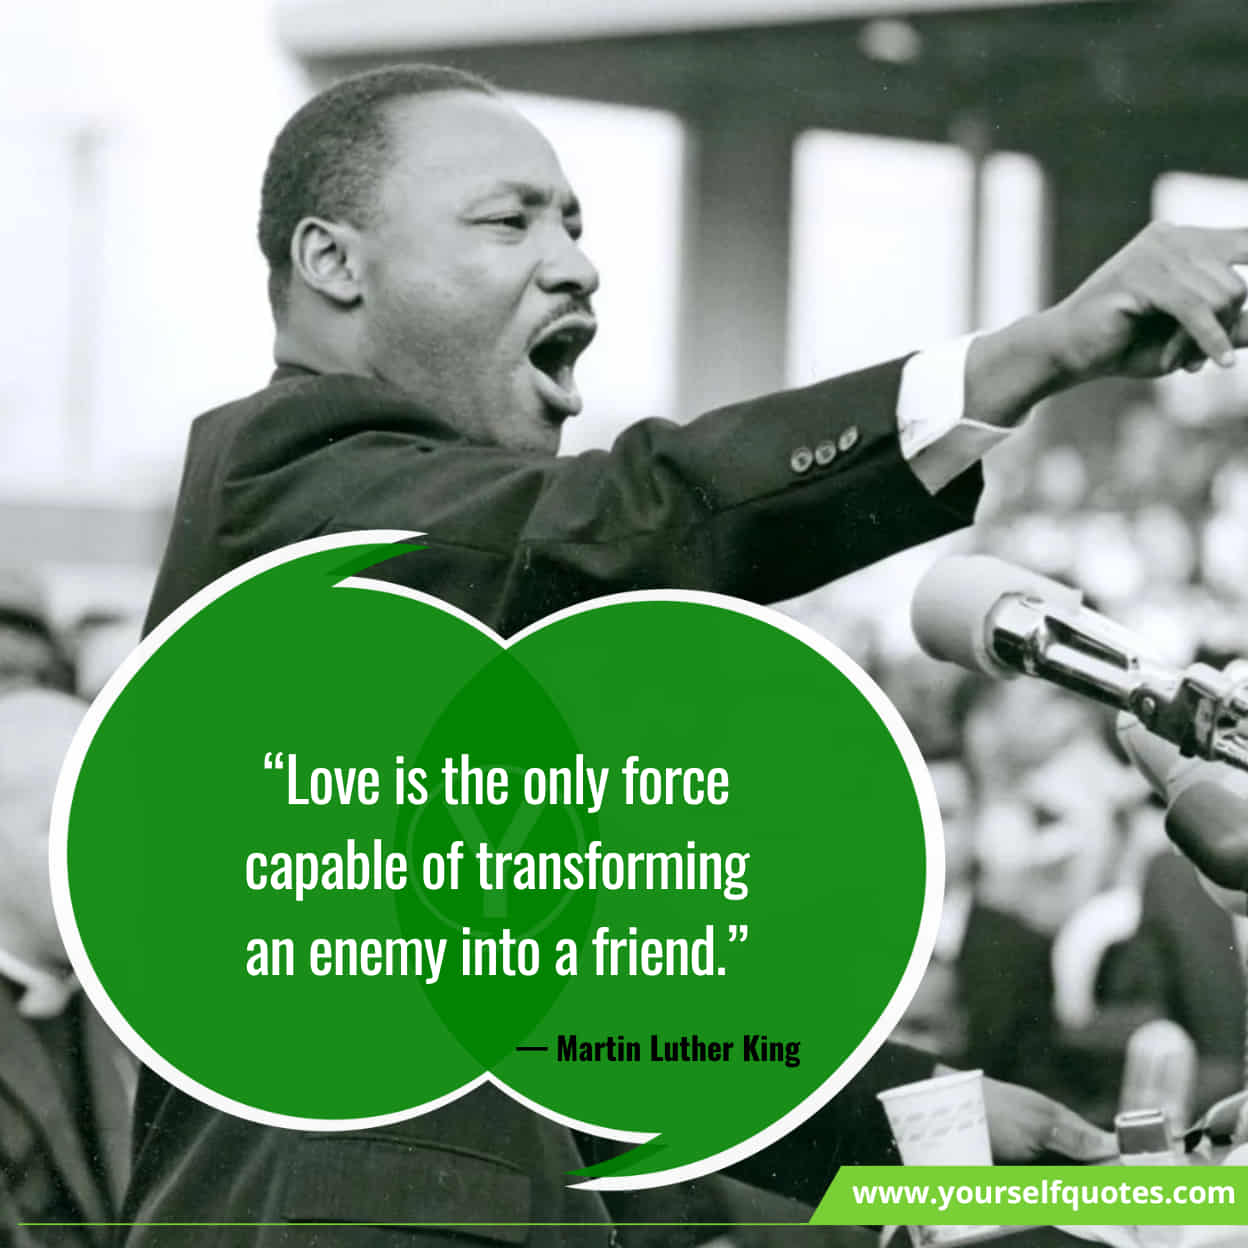 Best Martin Luther King, Jr. Inspiring Quotes